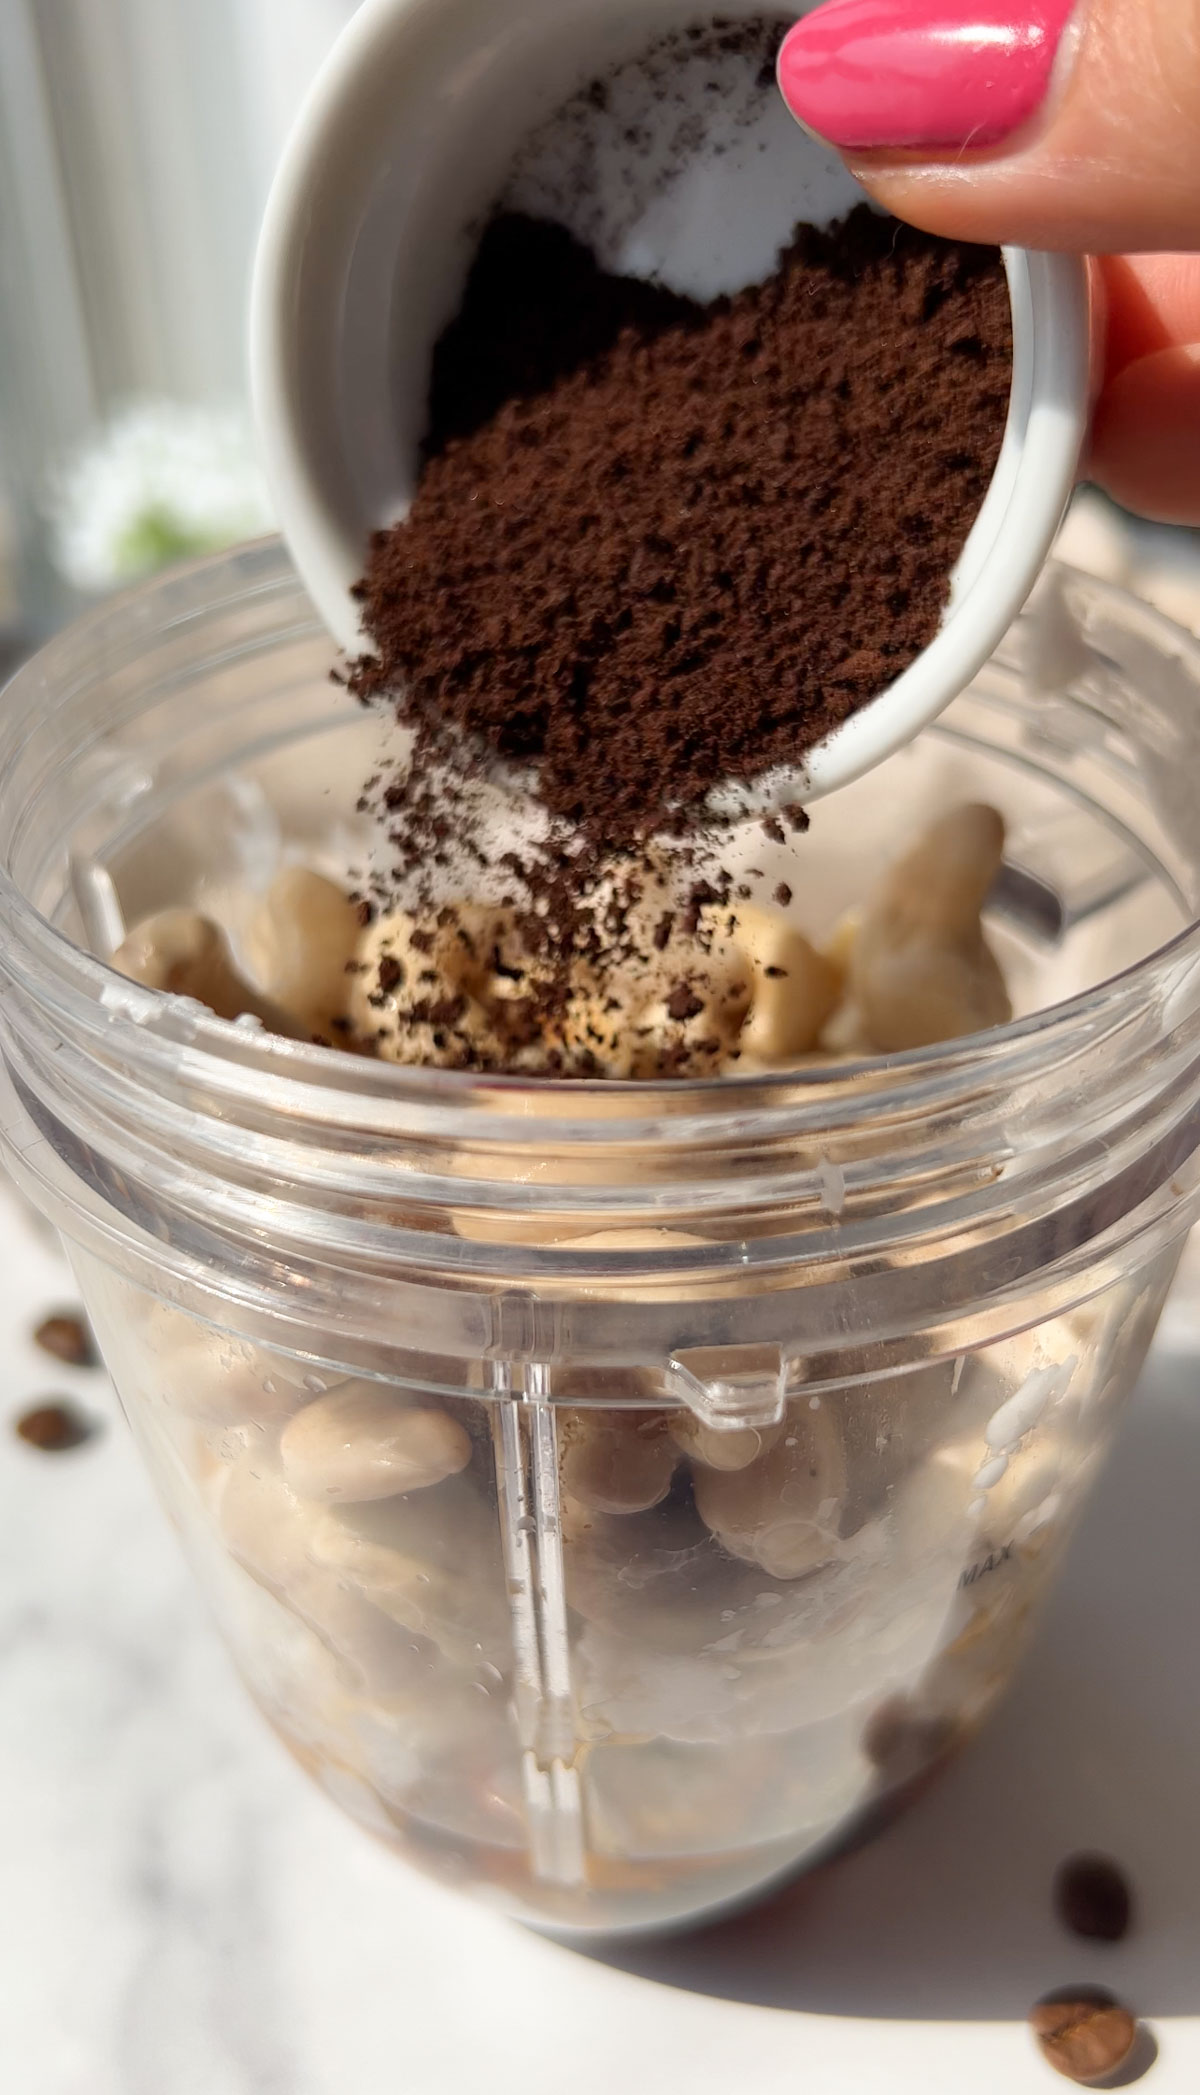 Adding all the ingredients to make vegan coffee ice cream to a blender.